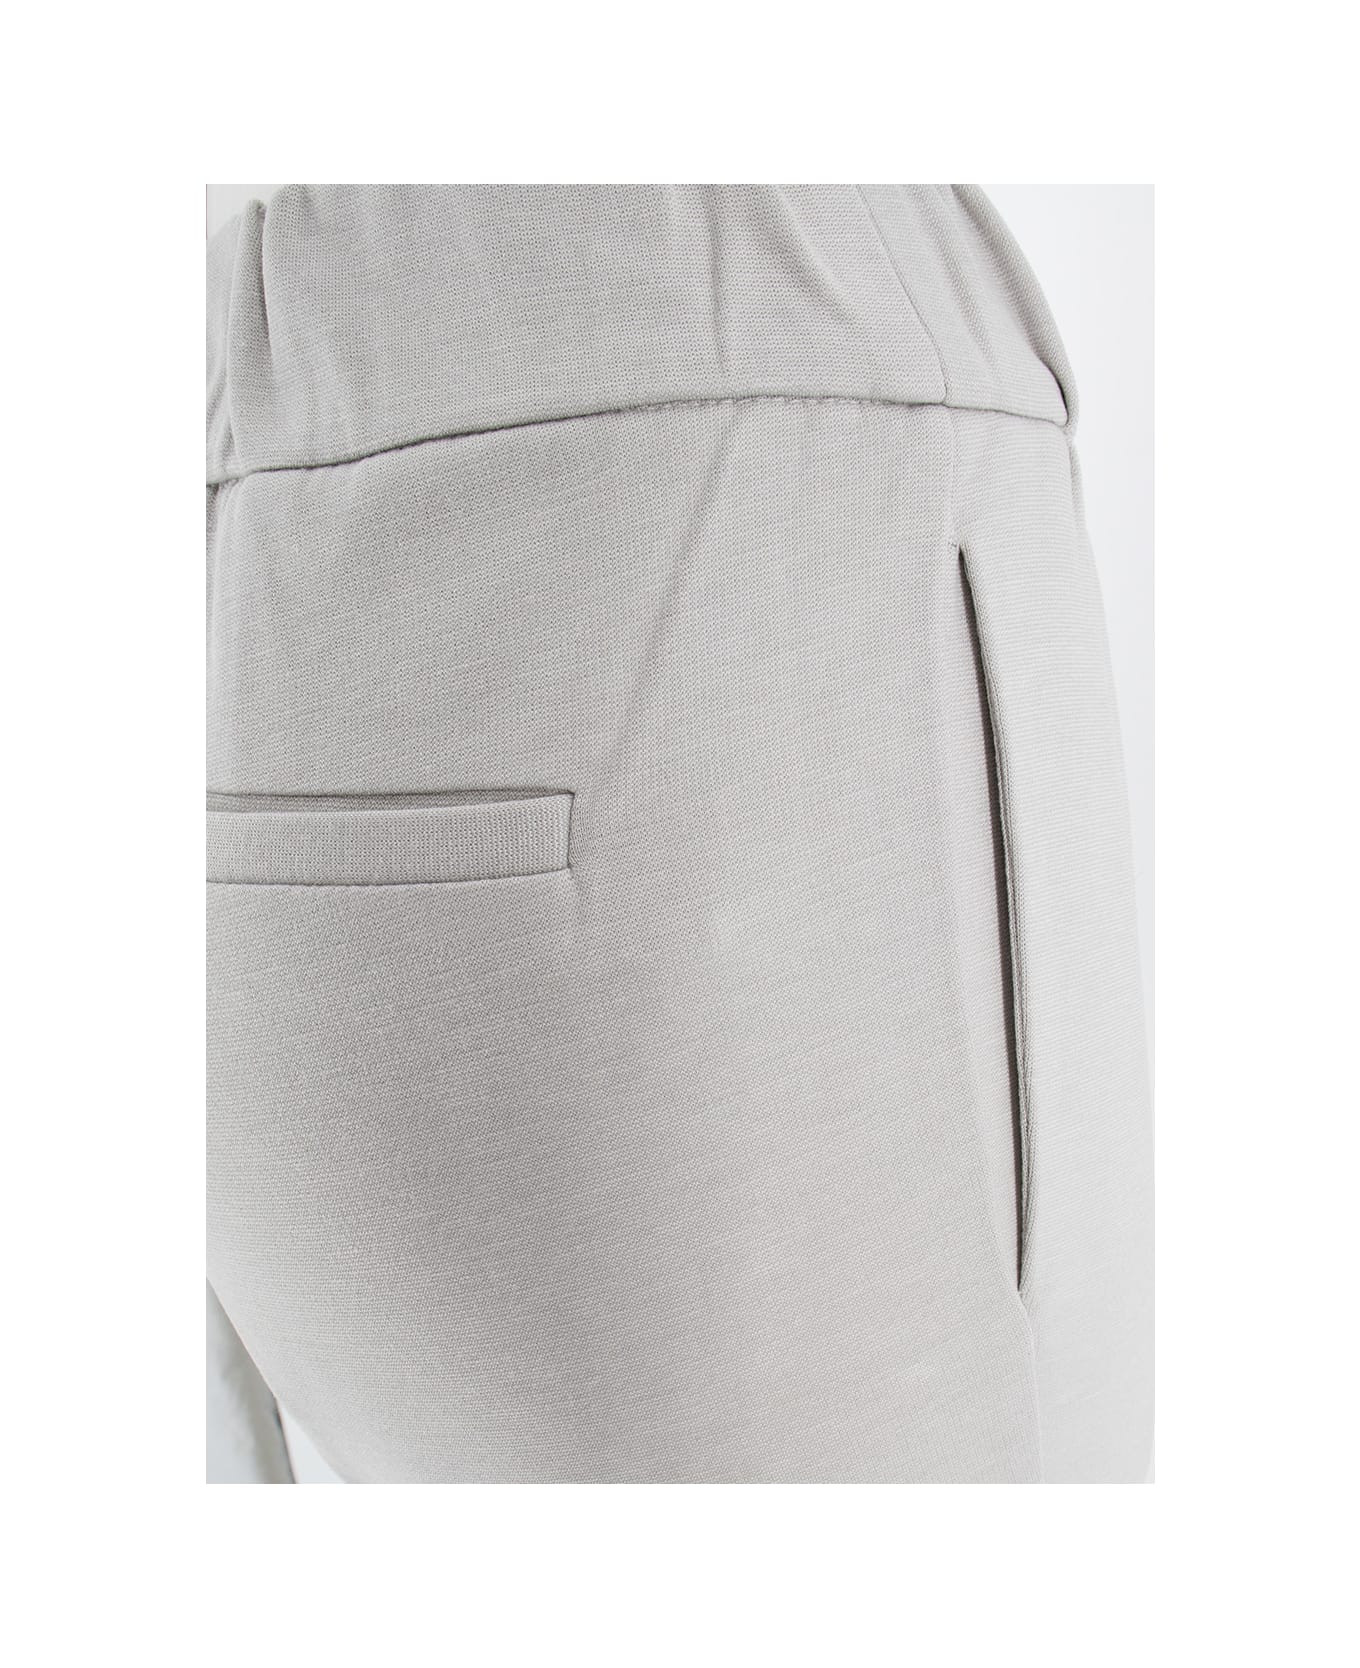 Le Tricot Perugia Trousers - LIGHT GREY          